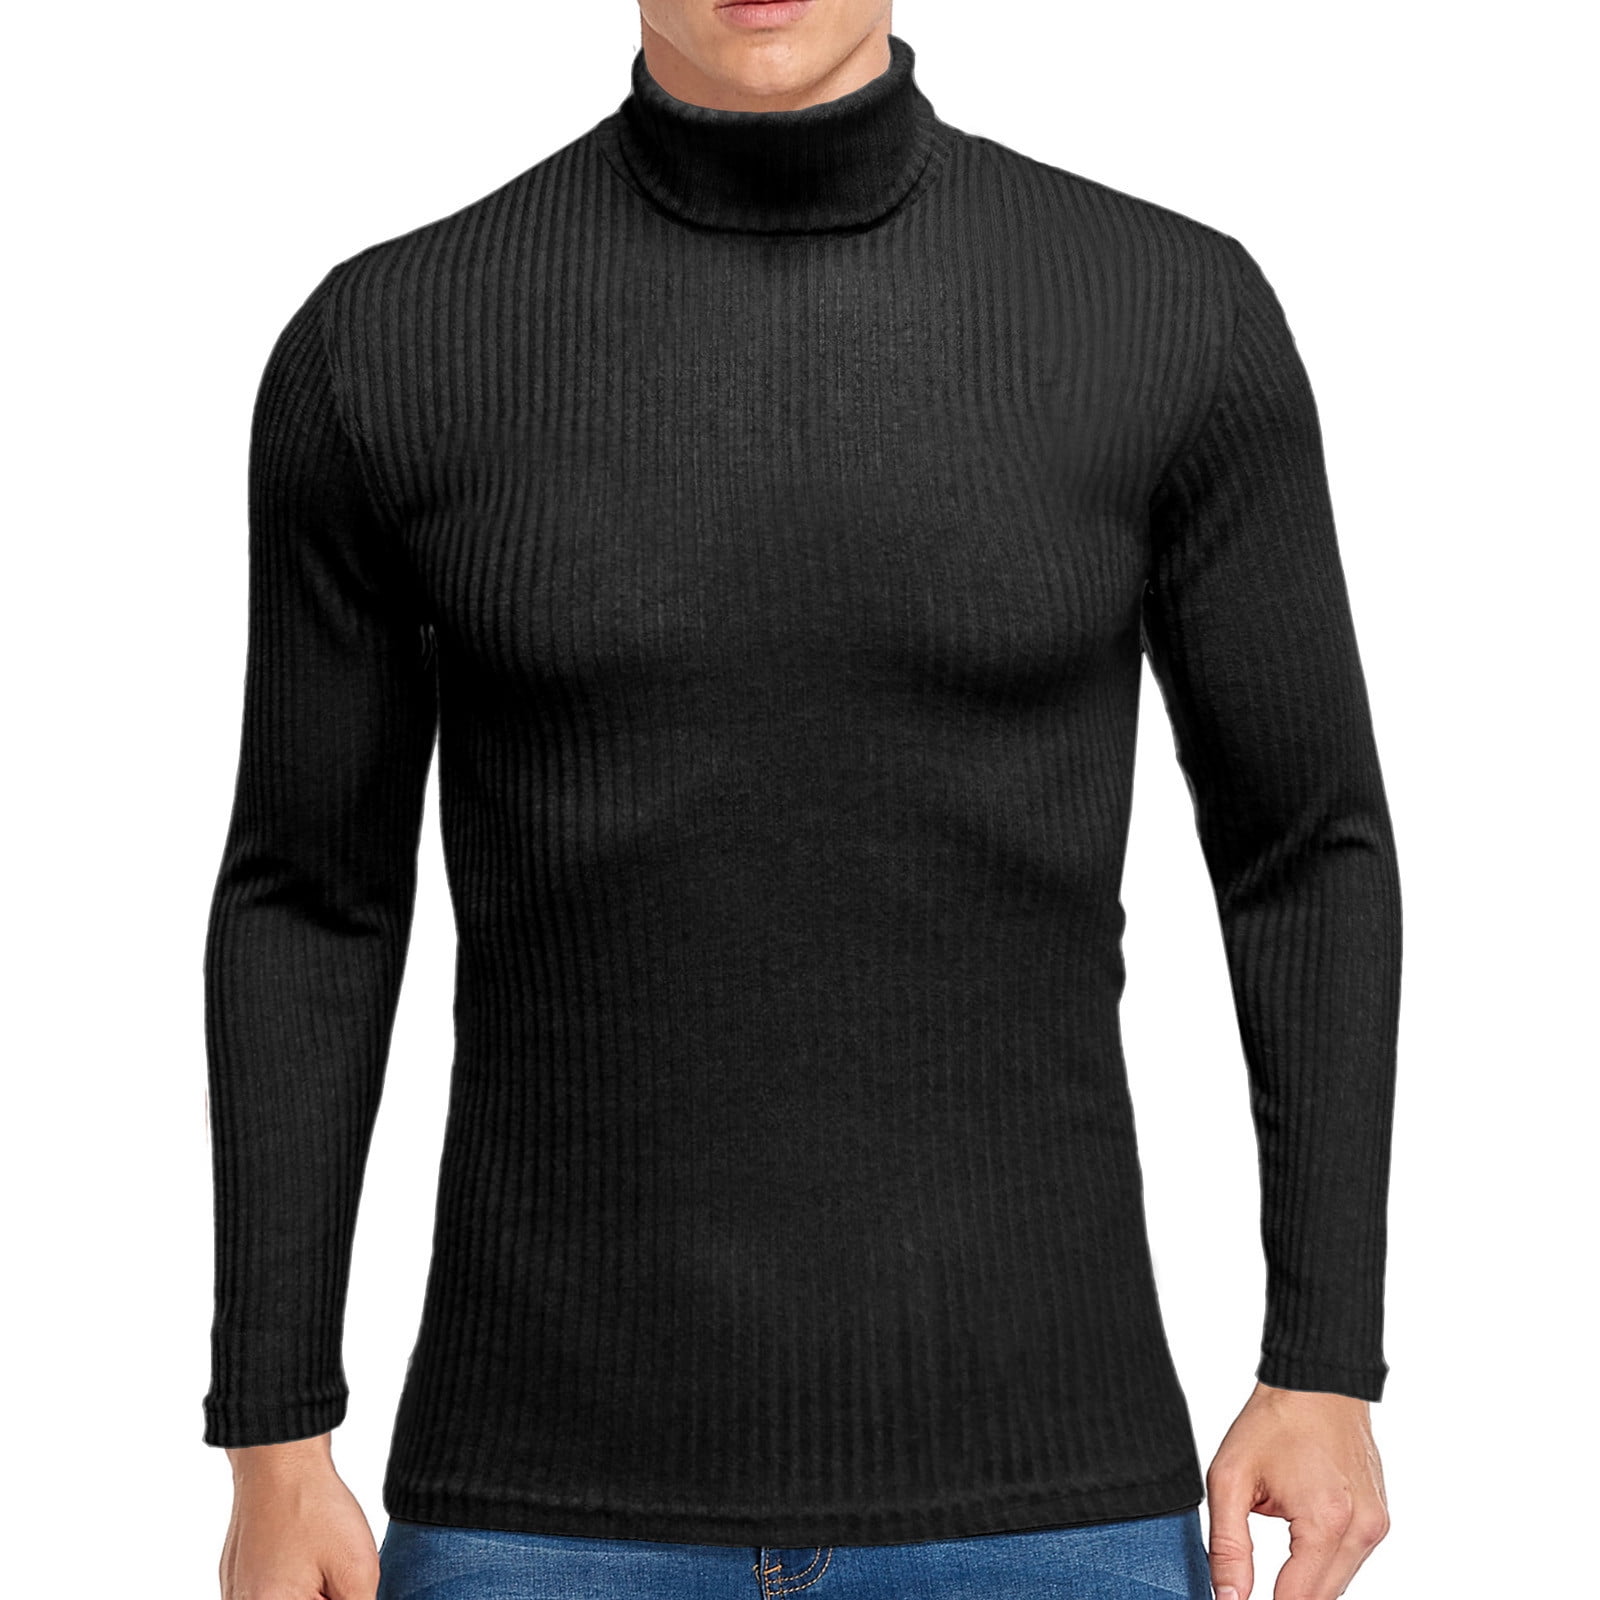 Fall Sweaters for Men Clearance, Men Solid Ribbed Slim Fit Knitted ...